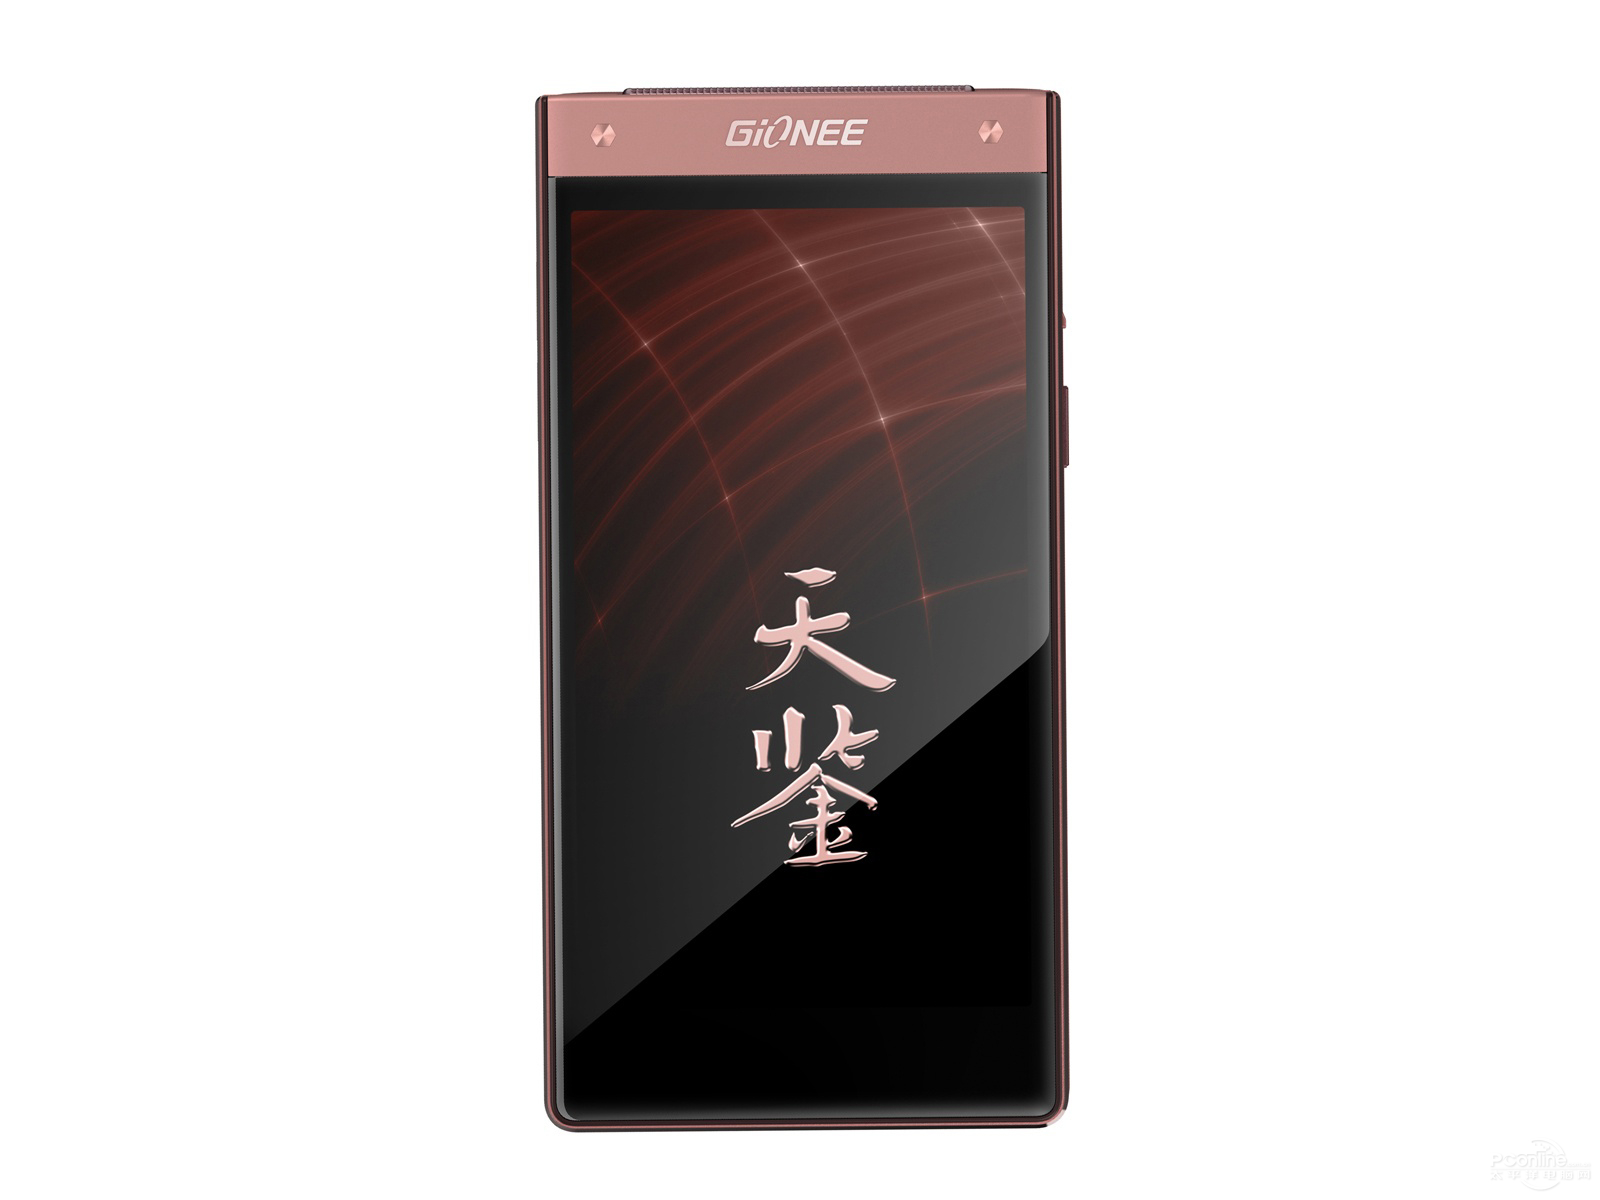 Gionee W909 front view